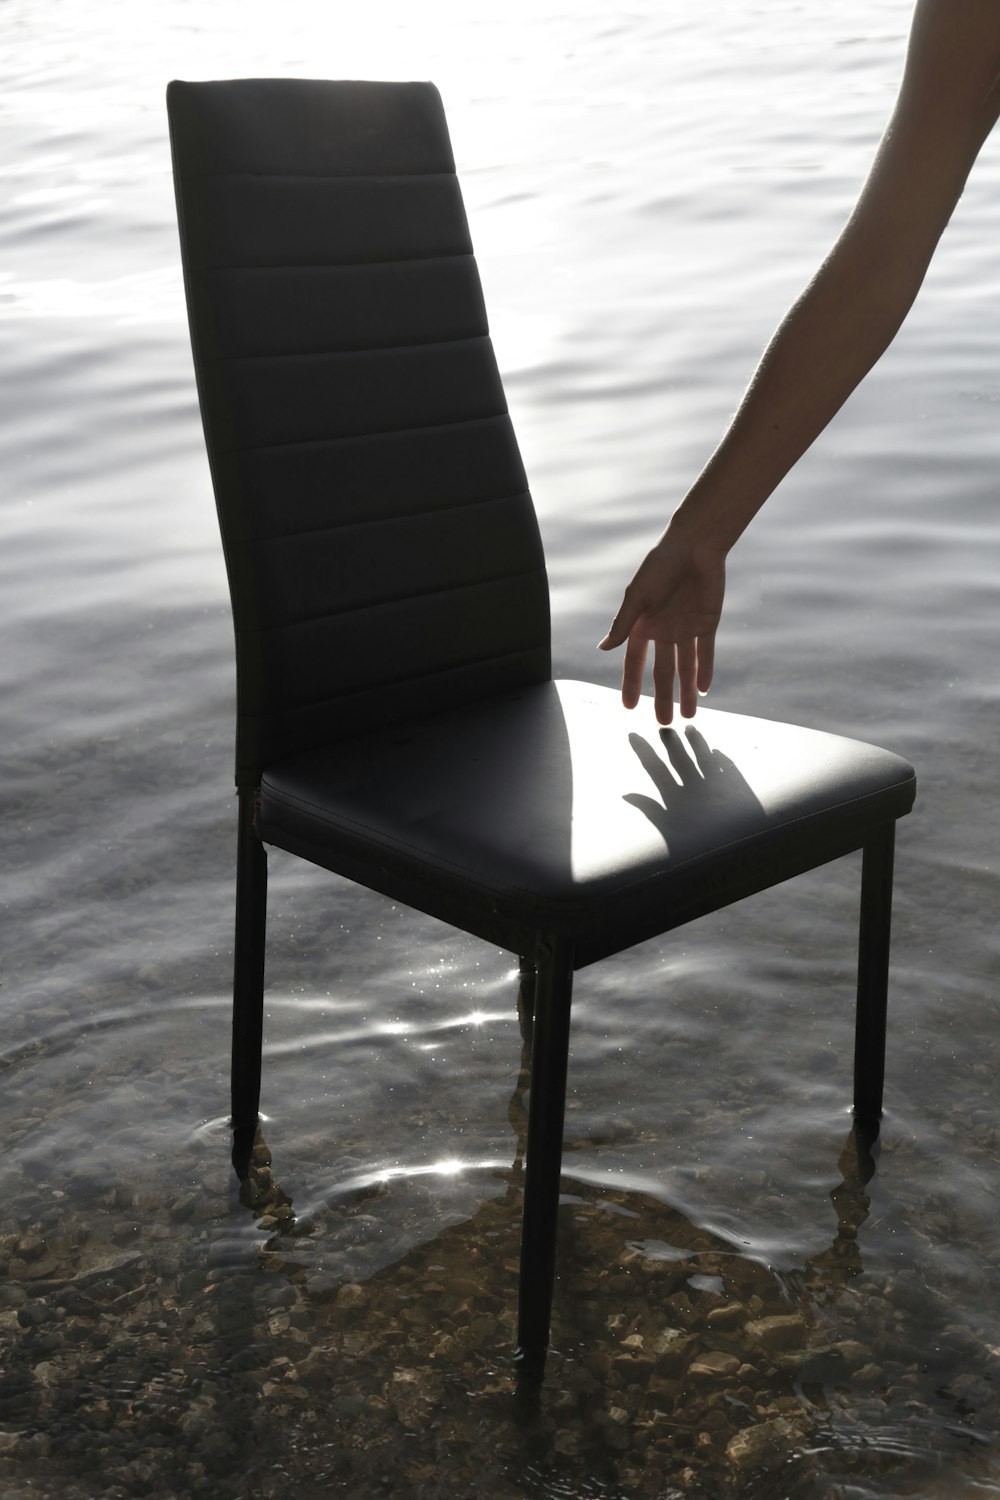 a person reaching for a chair in the water